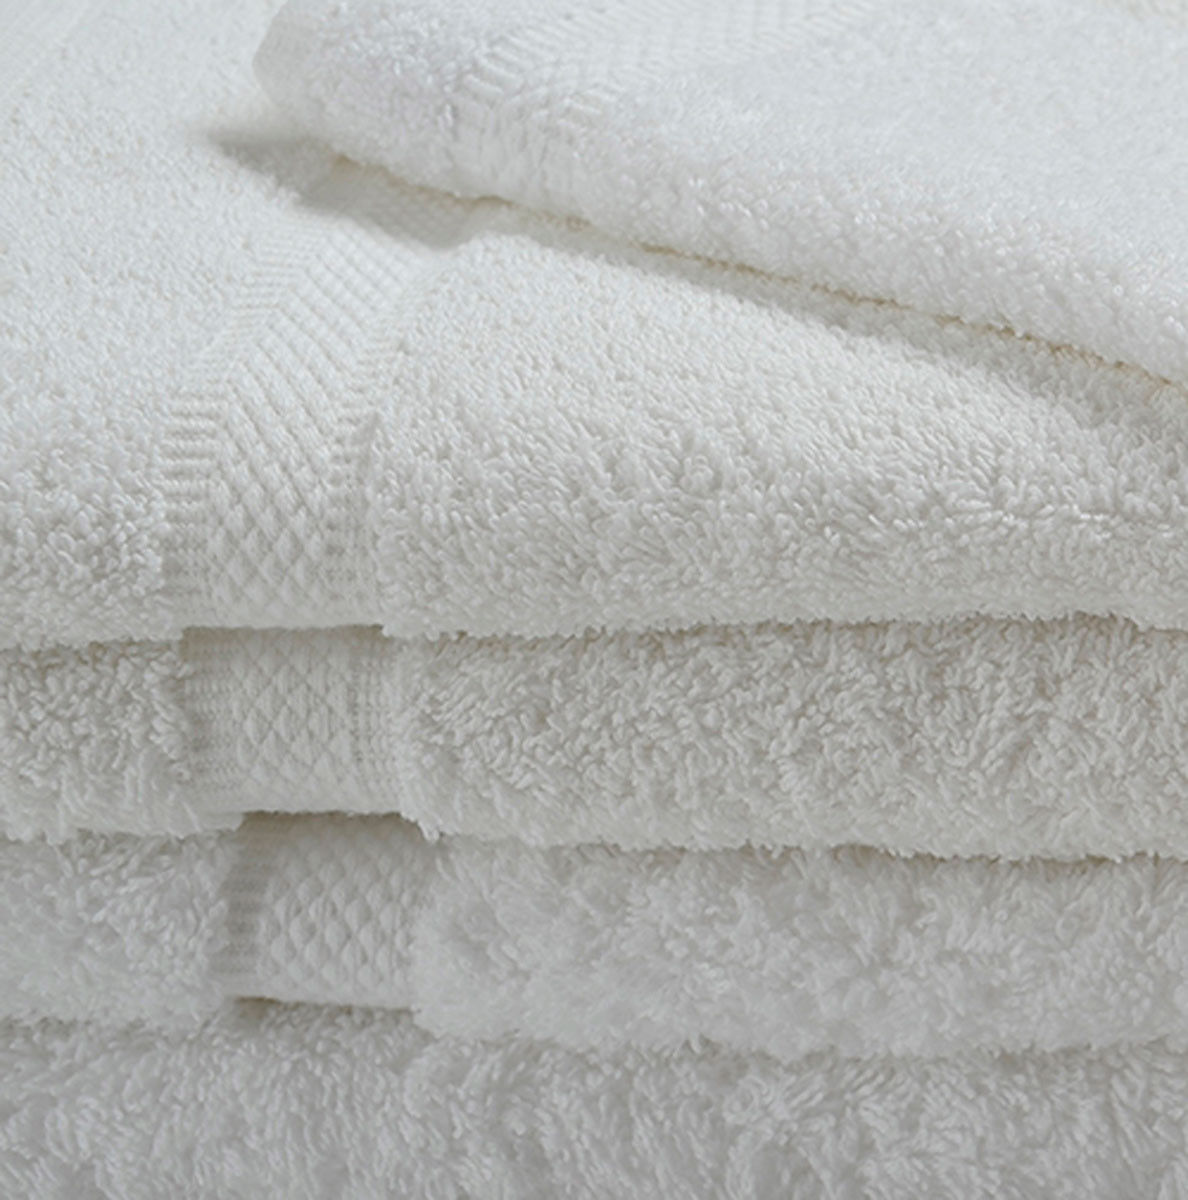 What features are exhibited by the Oxford Imperiale towels collection?